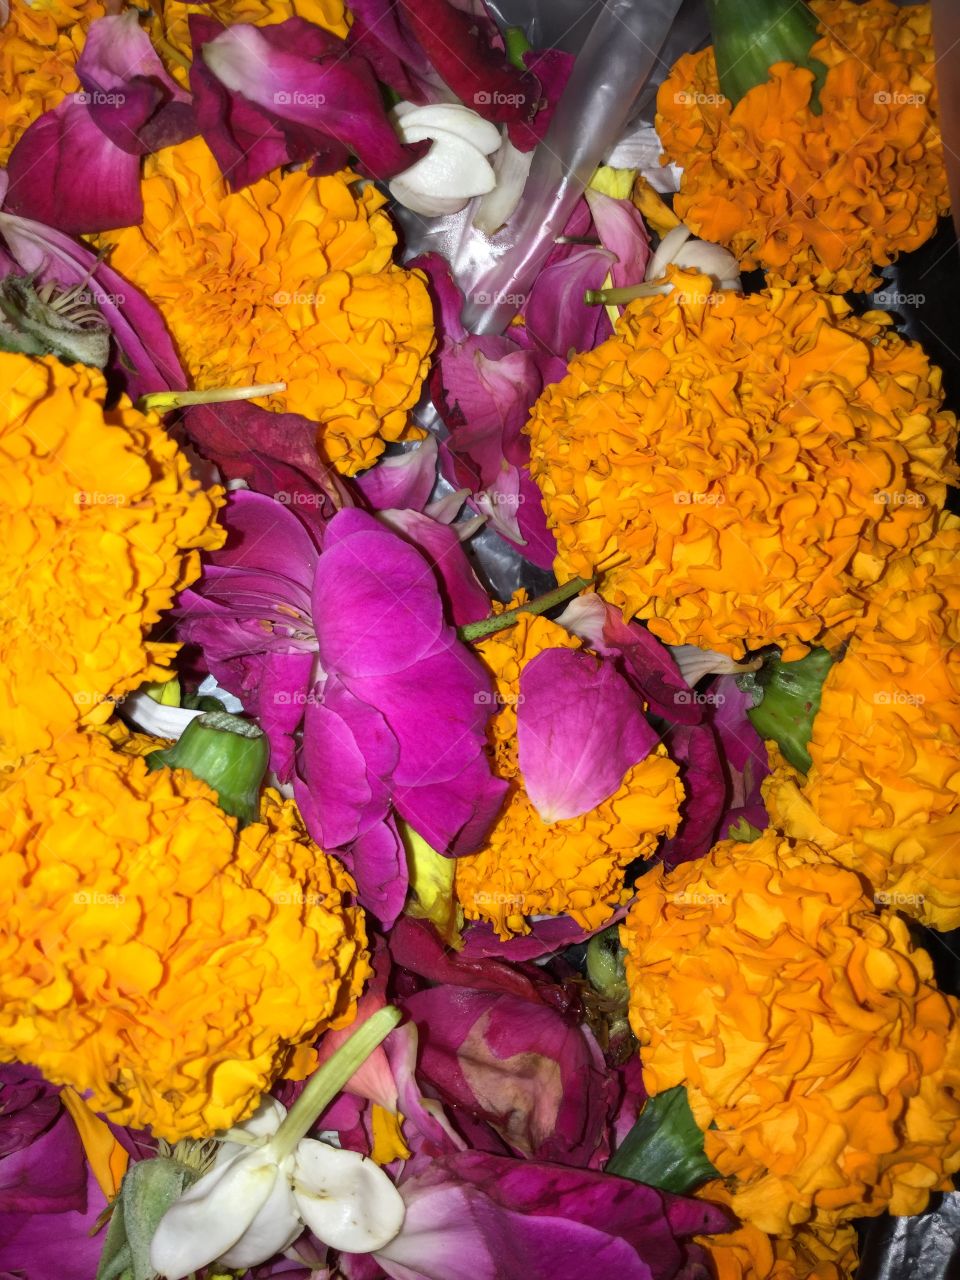 Flowers for puja